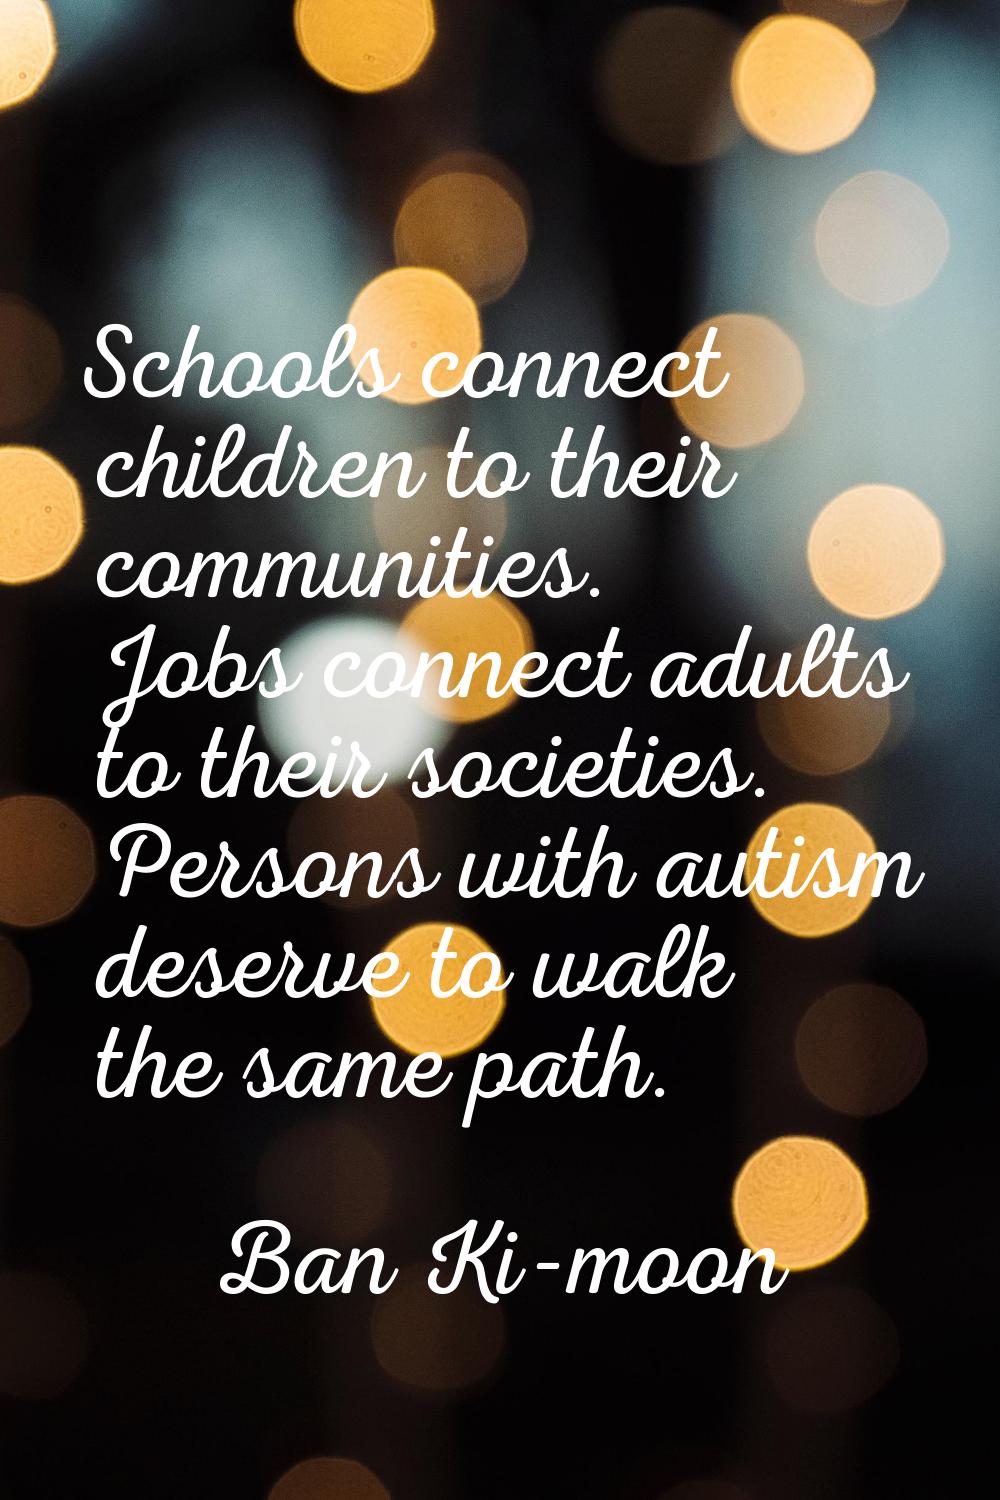 Schools connect children to their communities. Jobs connect adults to their societies. Persons with